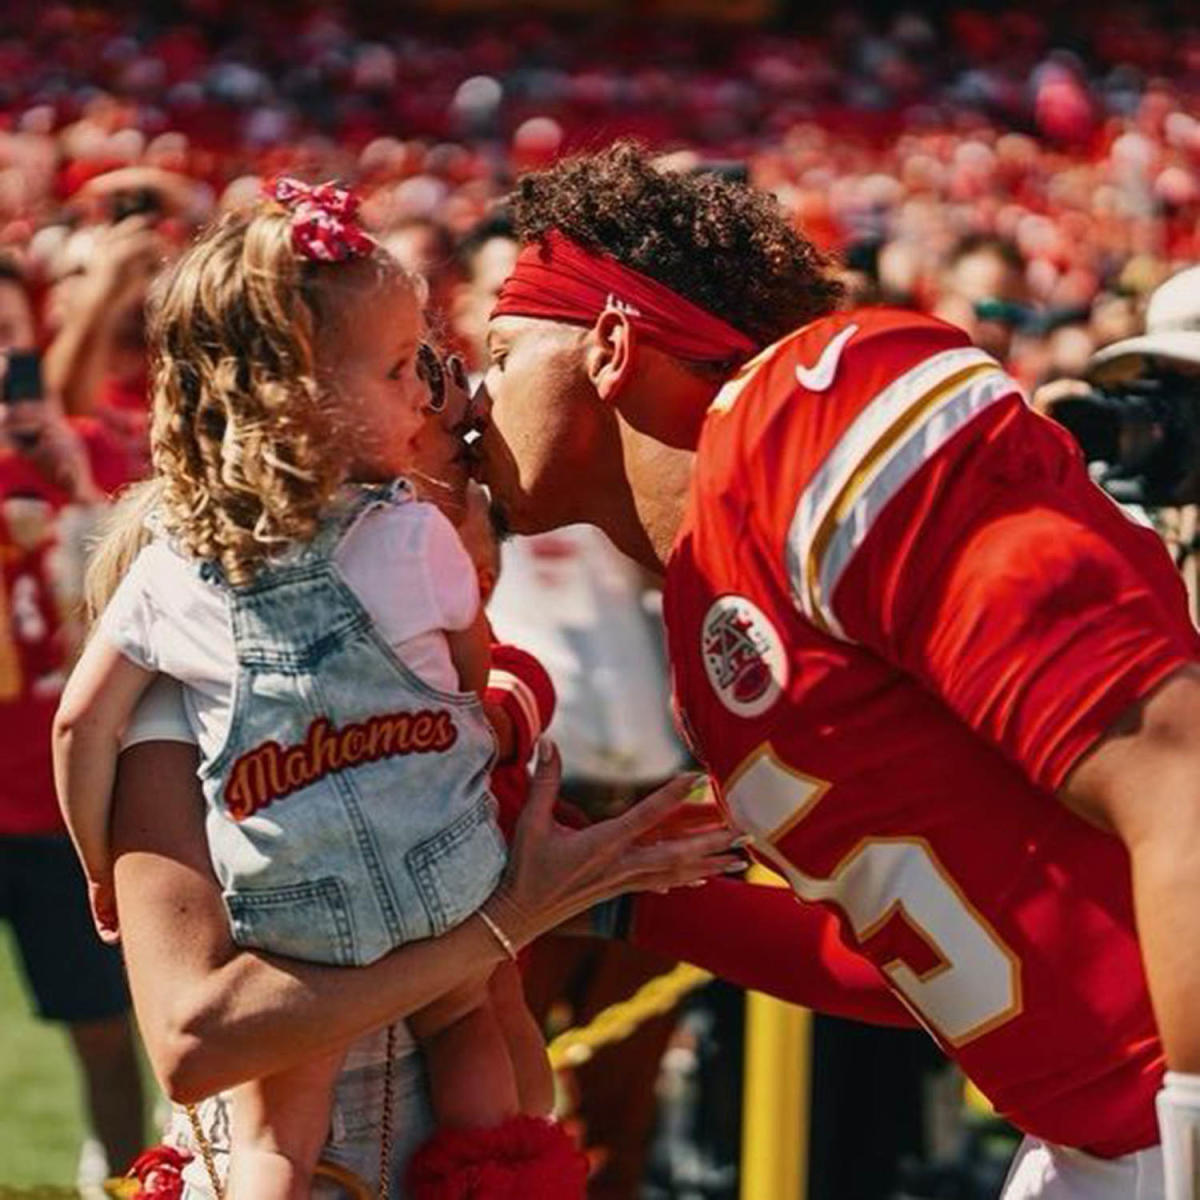 Proud dad Patrick Mahomes, wife Brittany Matthews and toddler